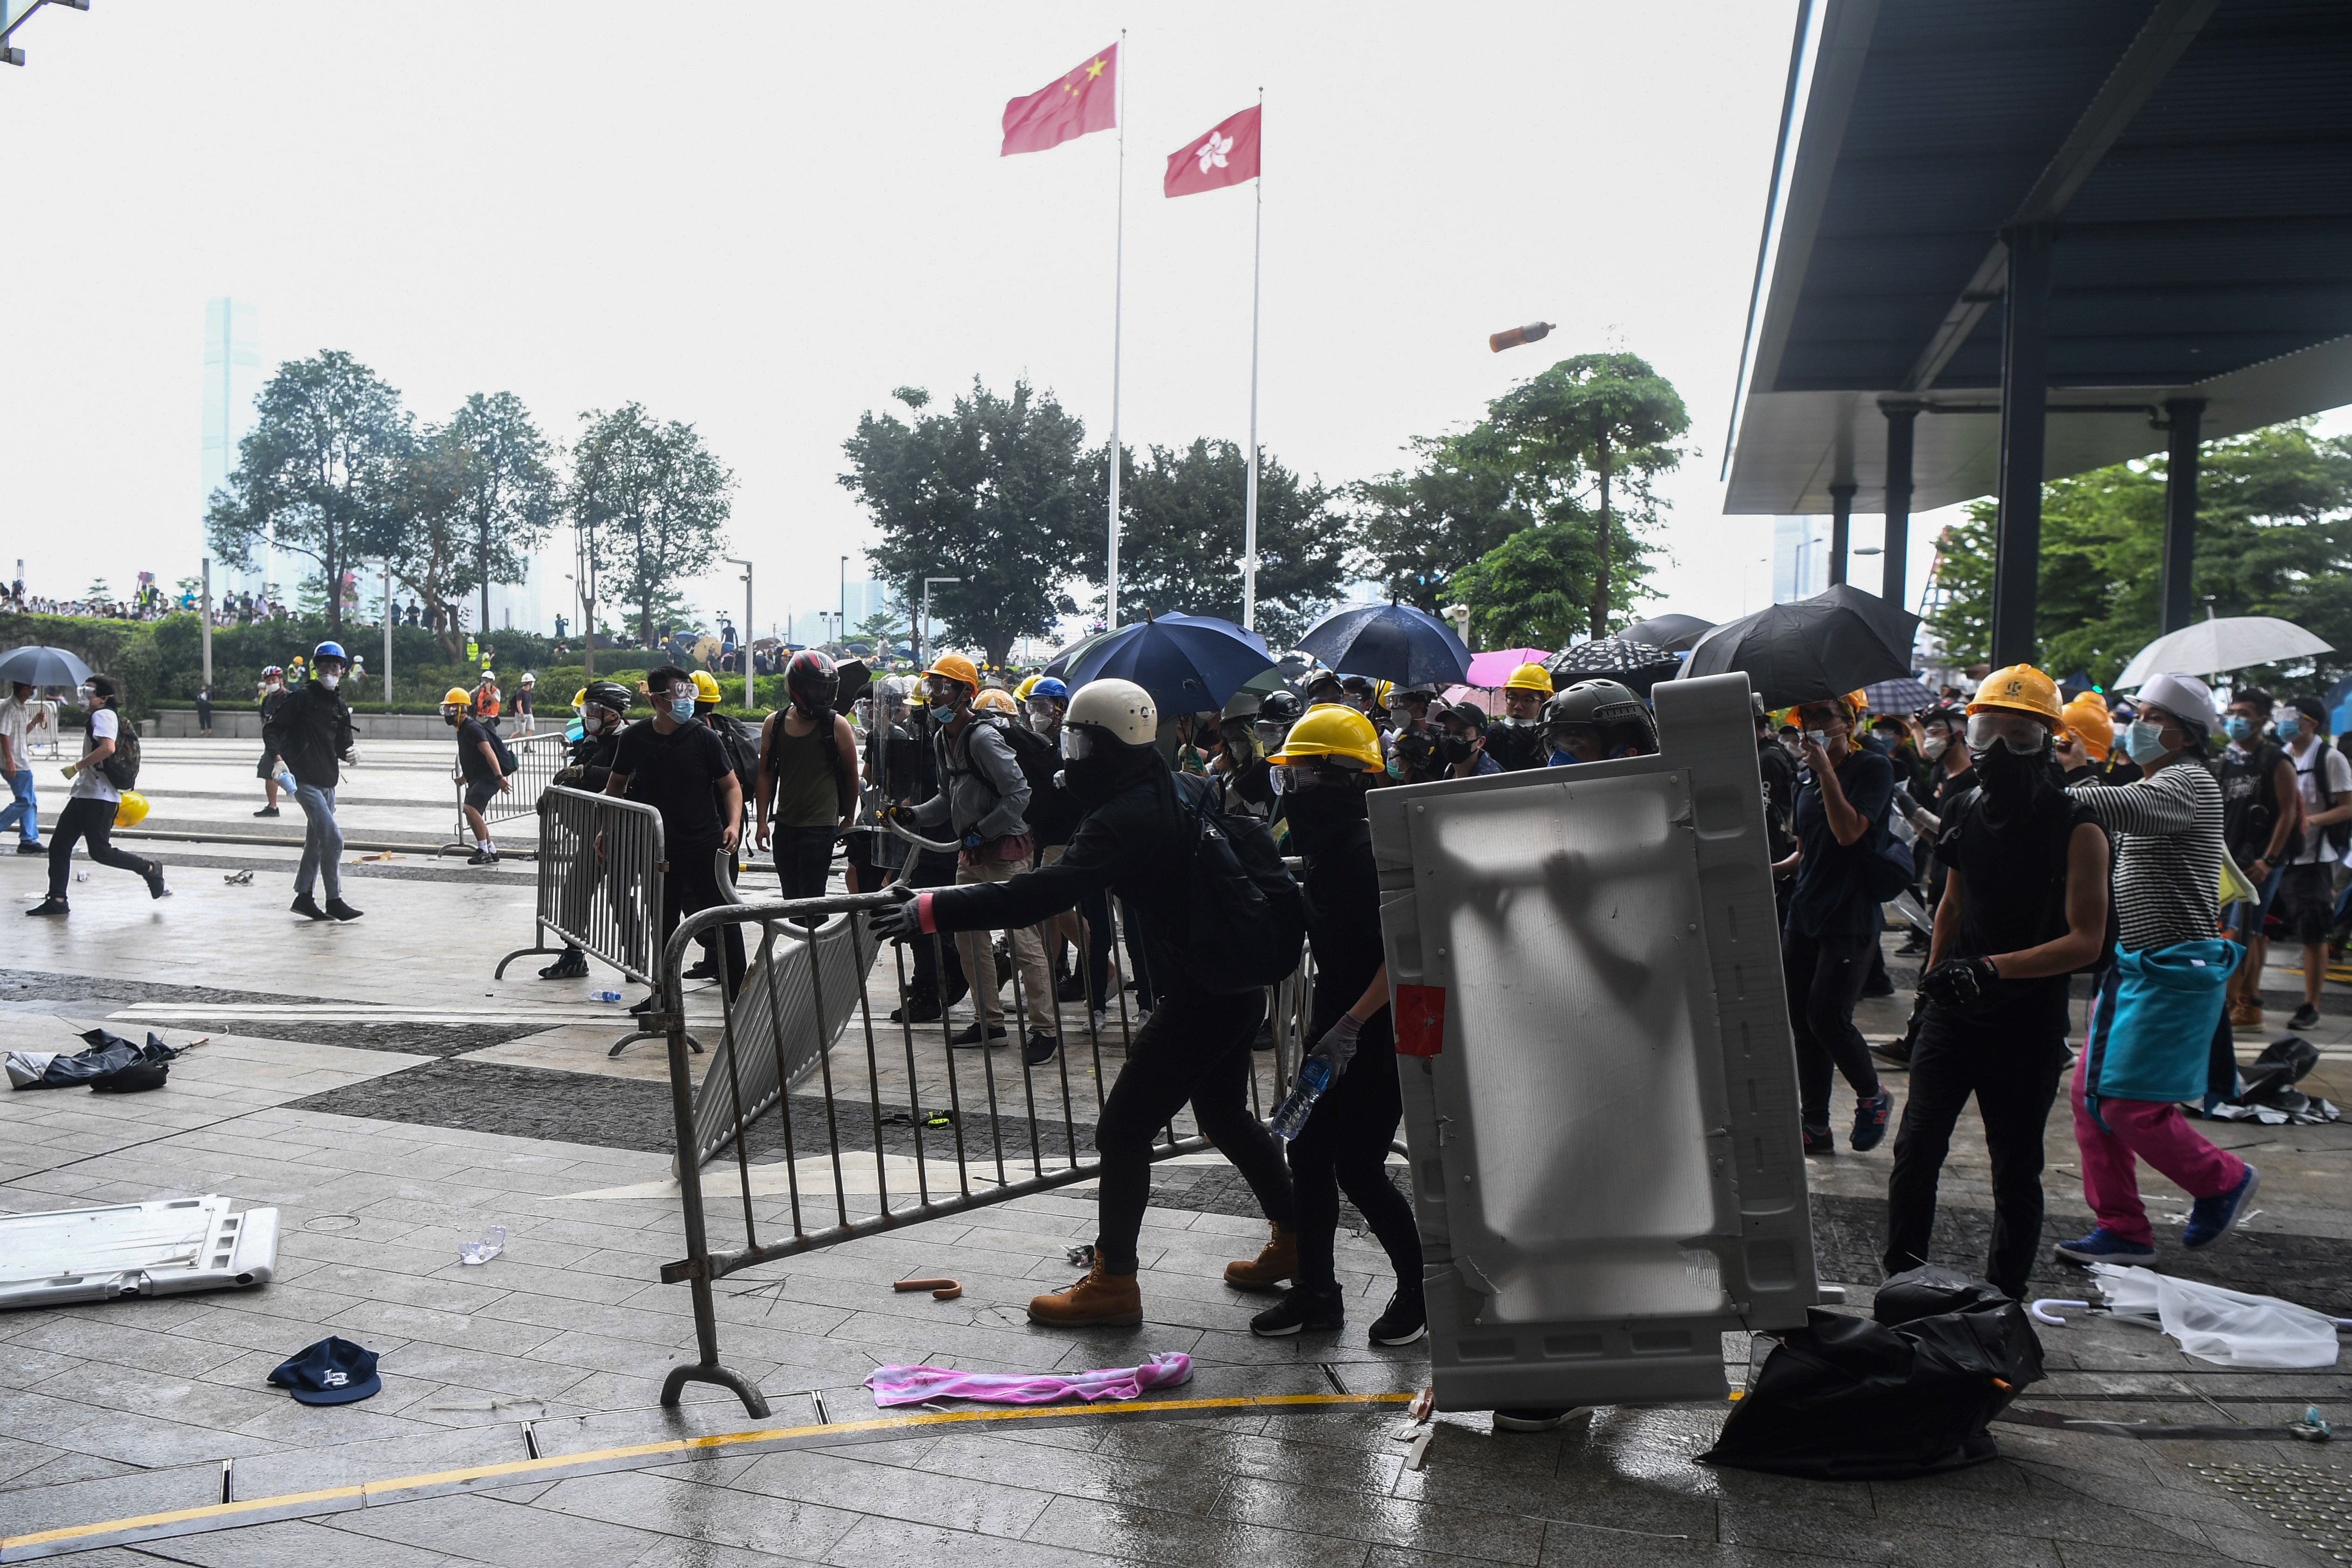 Protesters clash with police during a demonstration outside the Legislative Council Complex in Hong Kong on June 12.